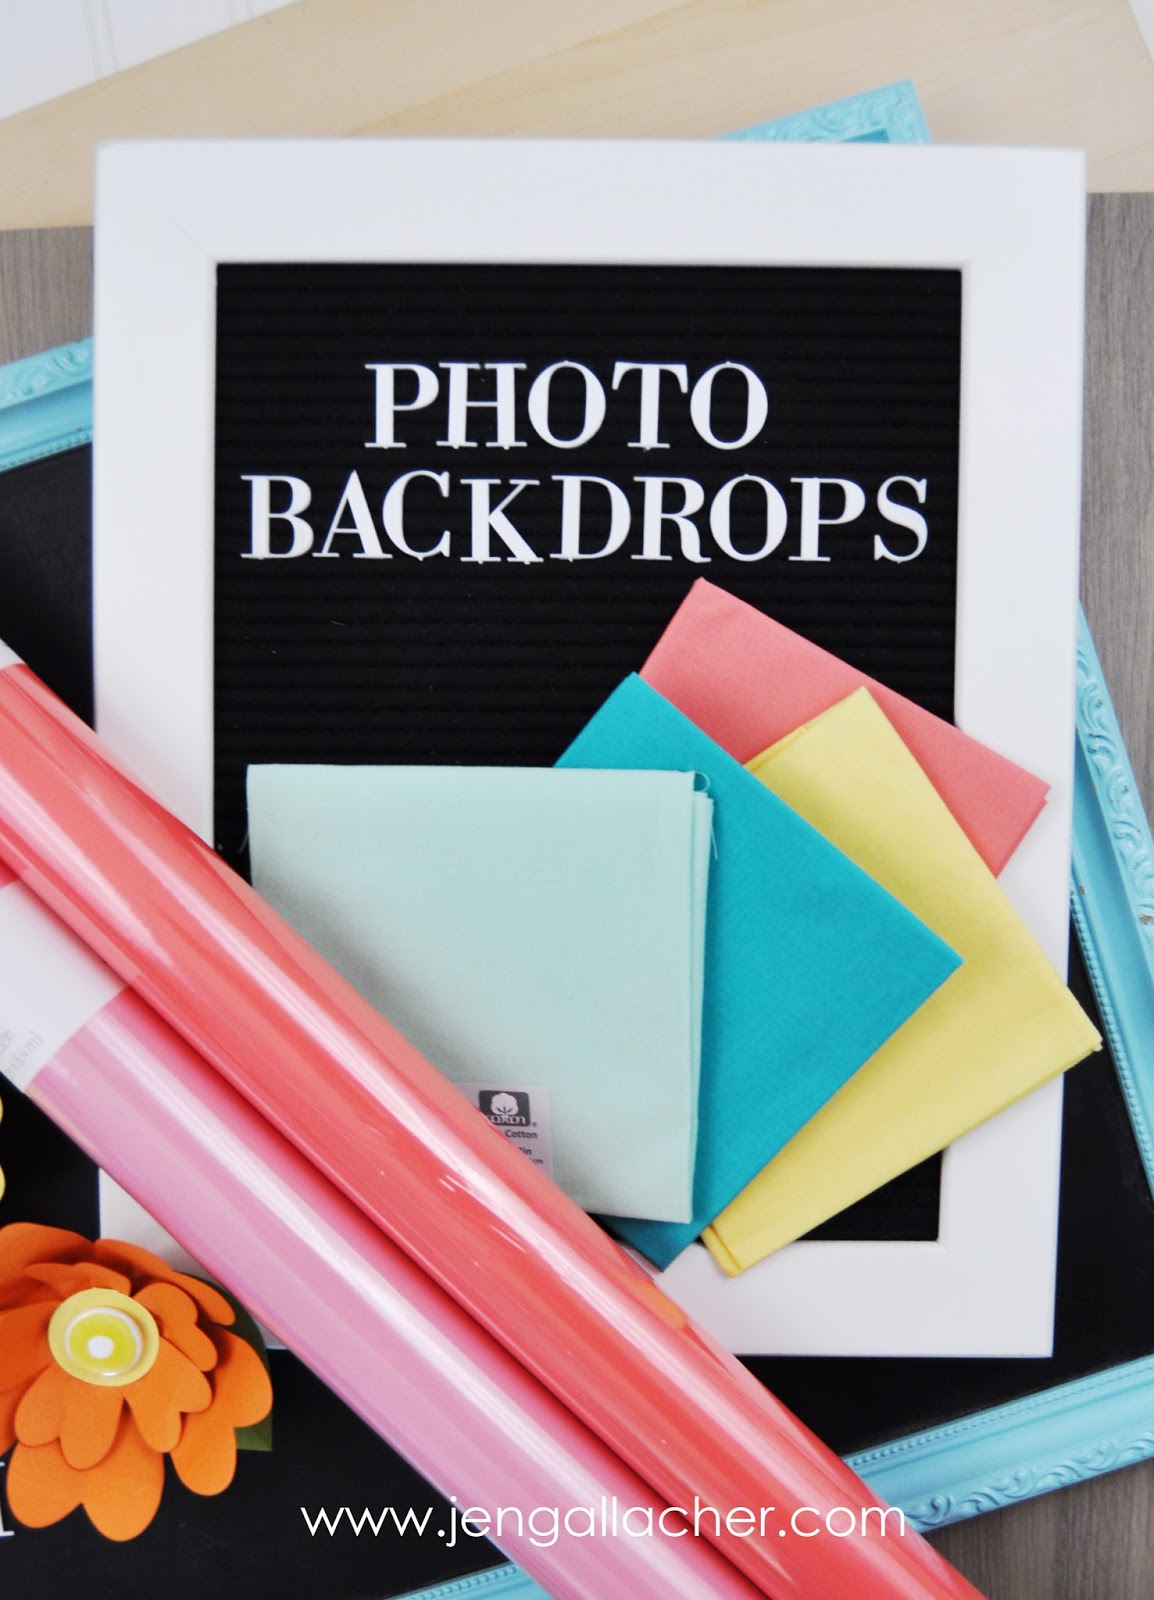 Inexpensive and cheap photo backdrop ideas by Jen Gallacher. Cheap ways to create photography backdrops for blogging. Inexpensive photo backdrops. #photographybackdrop #jengallacher #photography